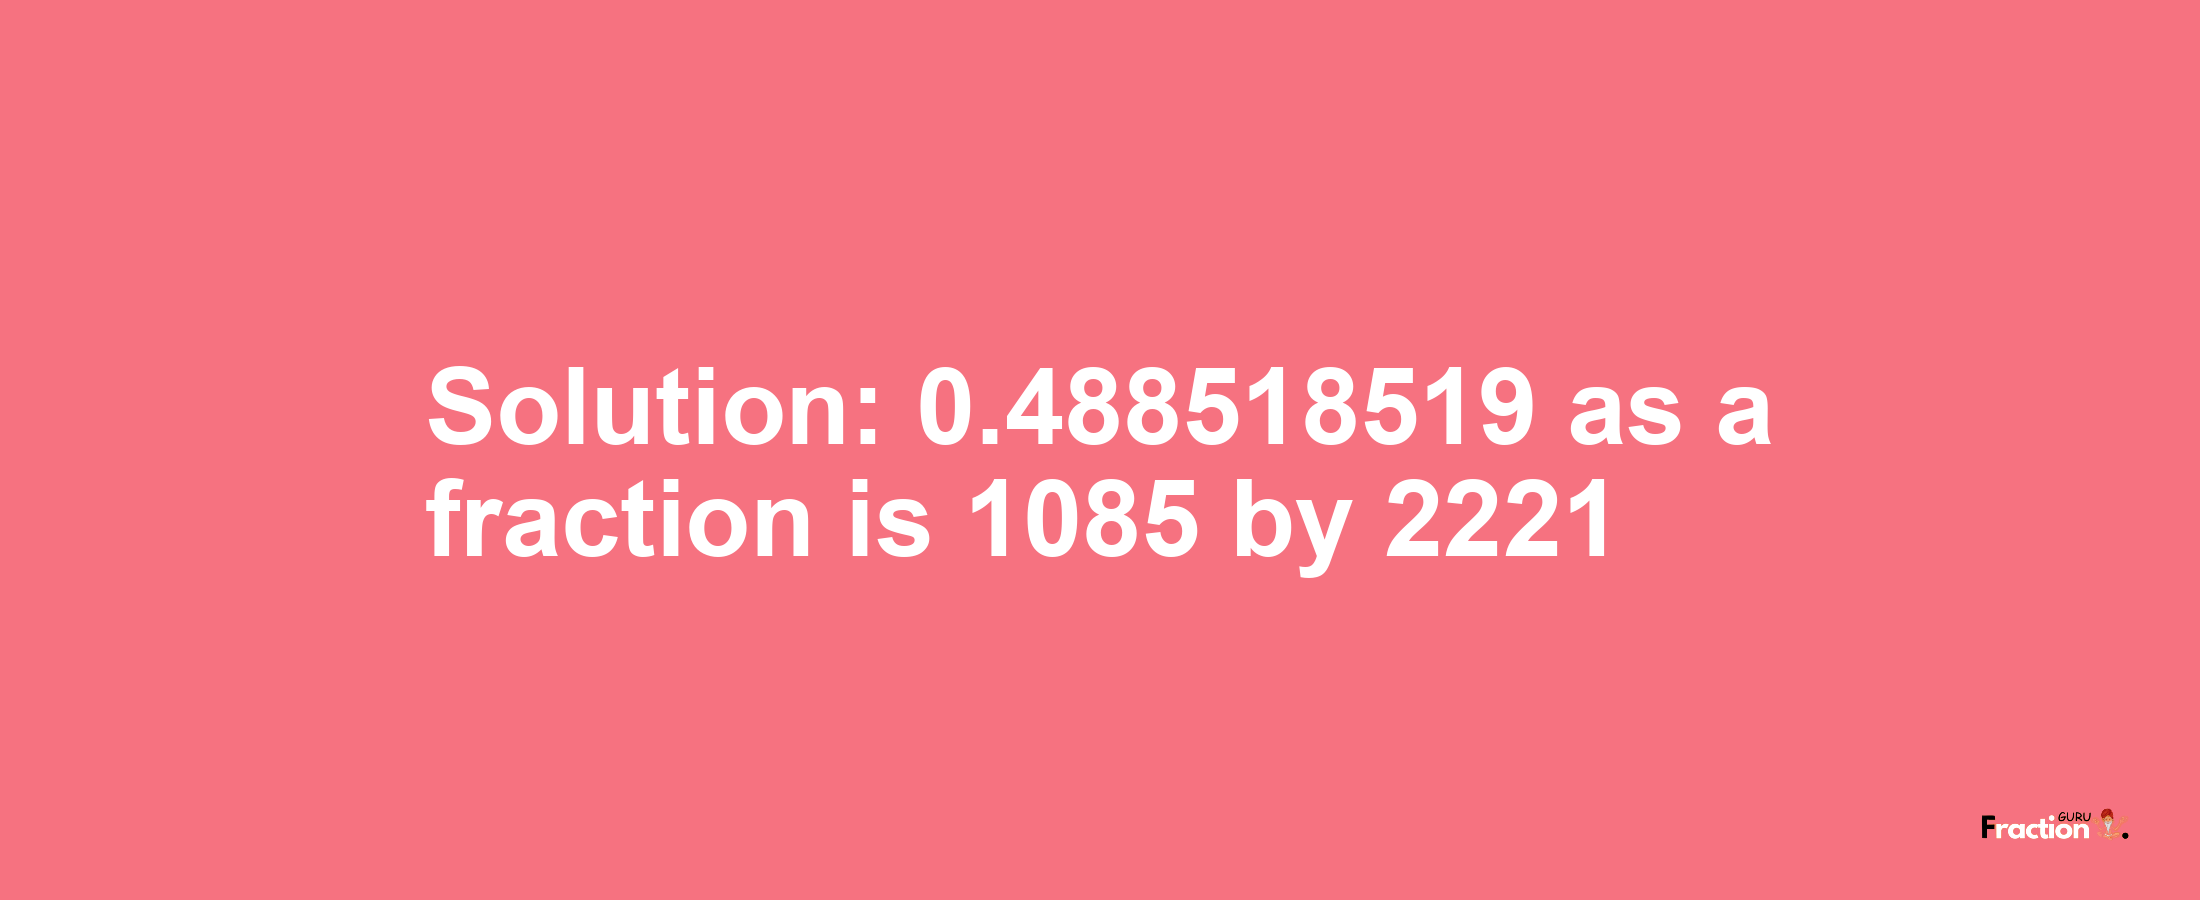 Solution:0.488518519 as a fraction is 1085/2221